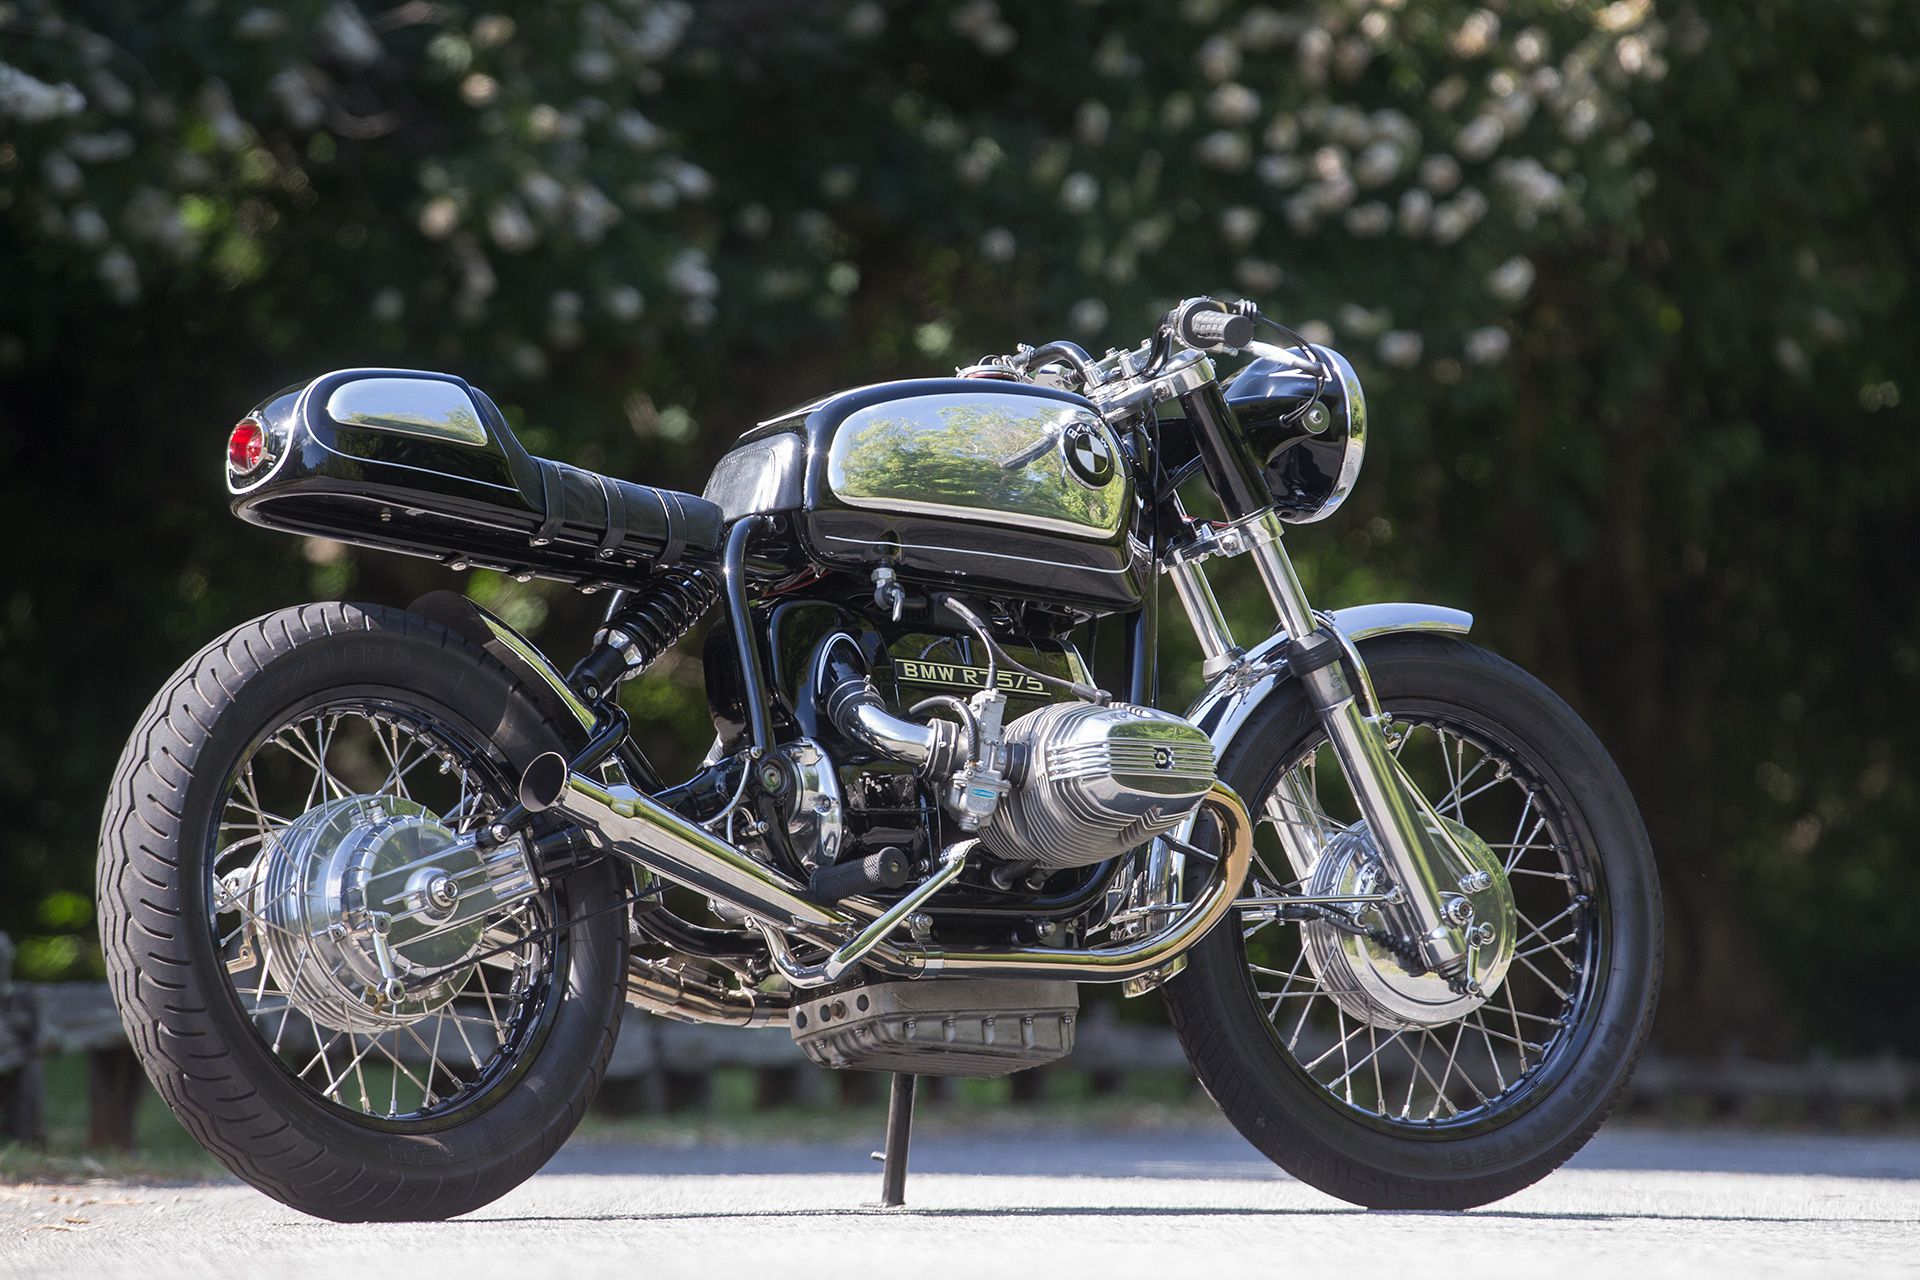 Bmw R75 5 Cafe Racer By Bryan Fuller Cycle World